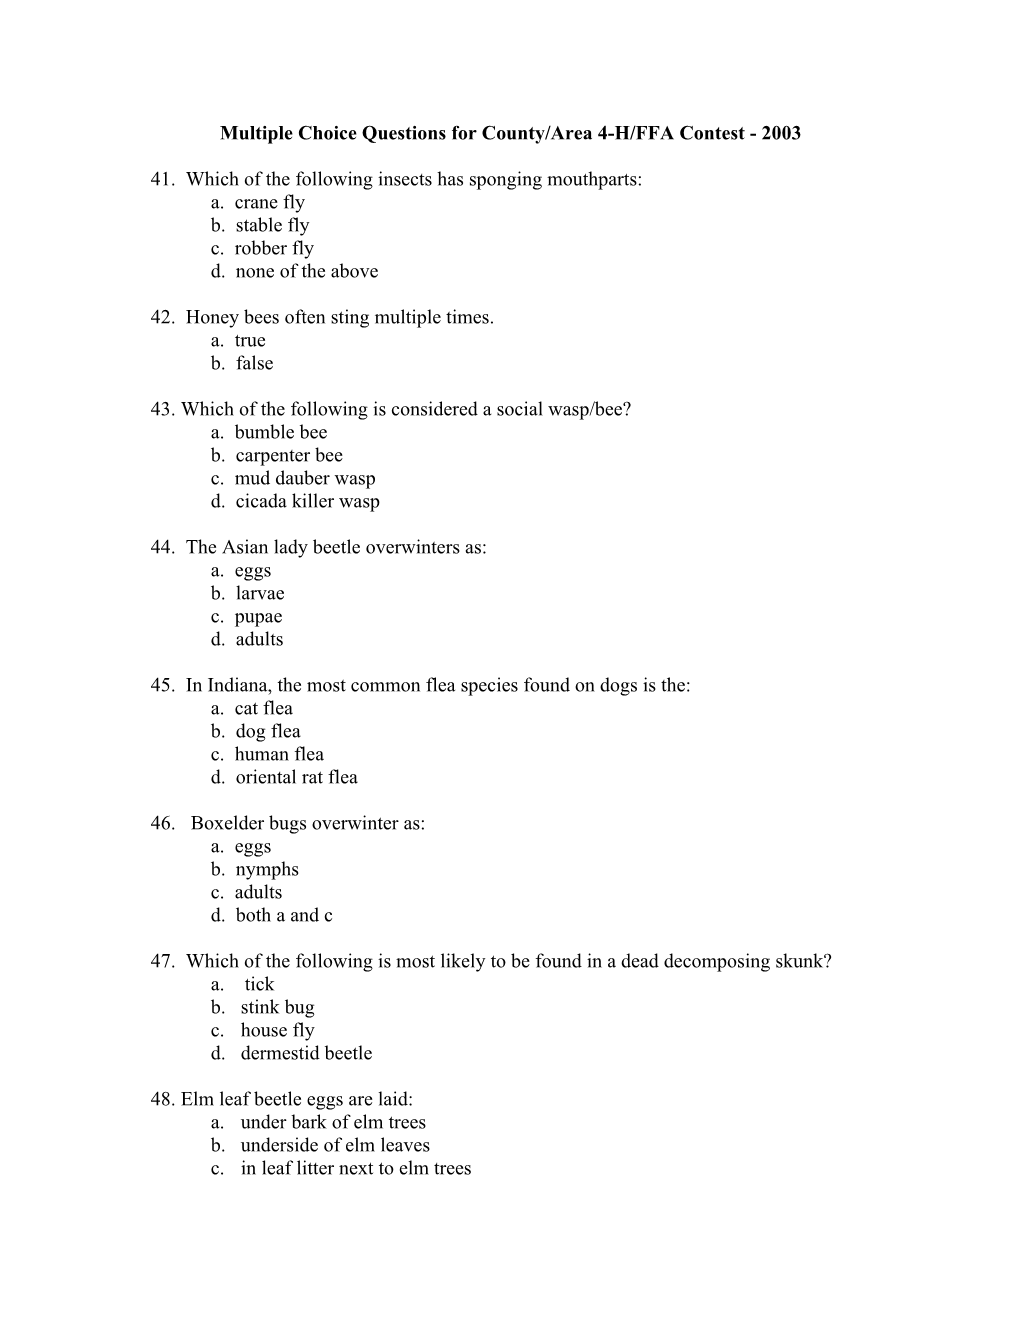 Multiple Choice Questions for County/Area 4-H/FFA Contest - 1998